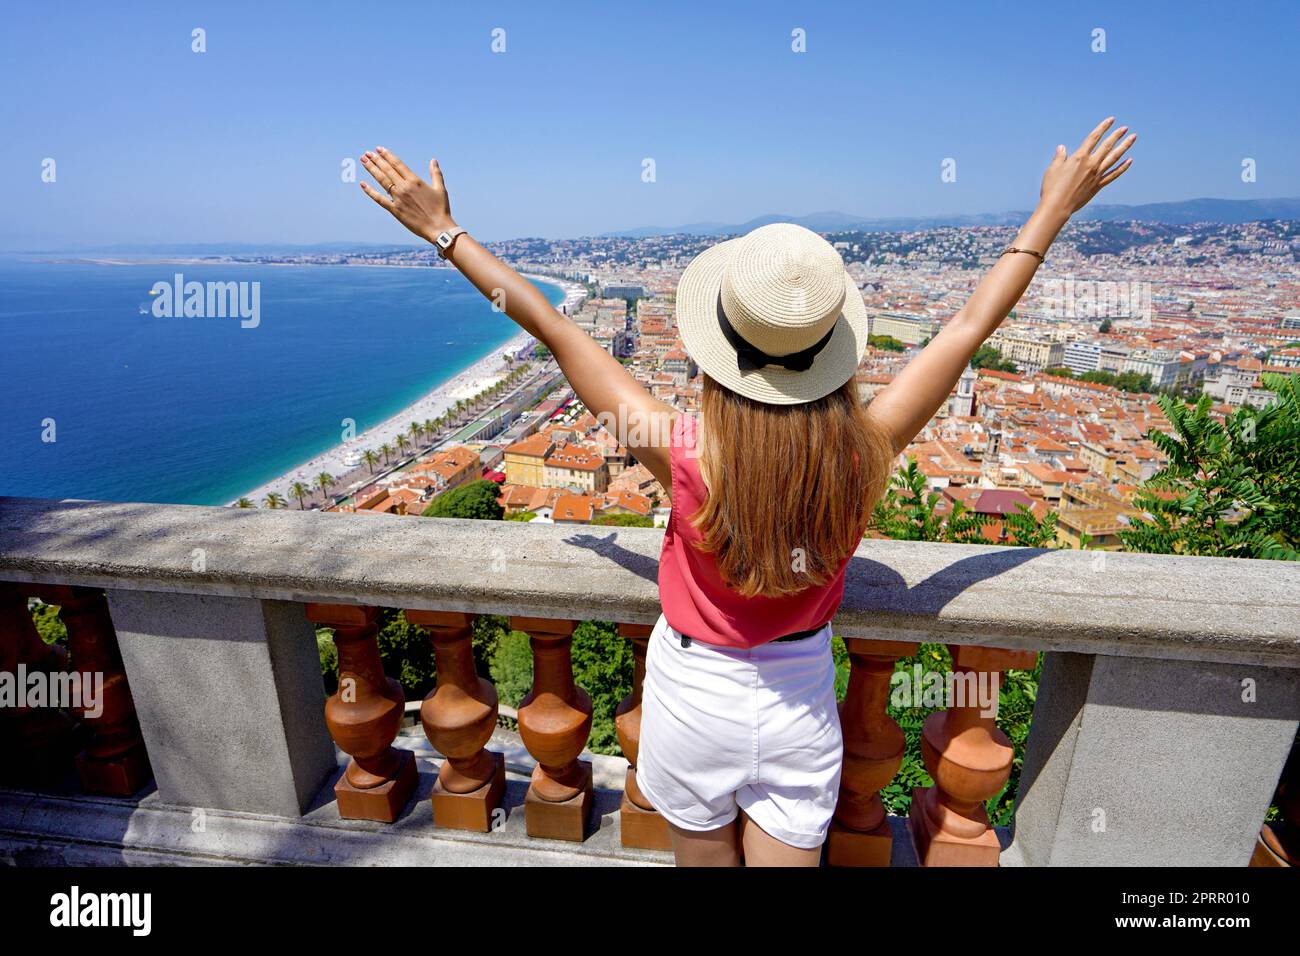 Tourism in French Riviera. Traveler girl with open arms enjoying cityscape of Nice, France. Stock Photo